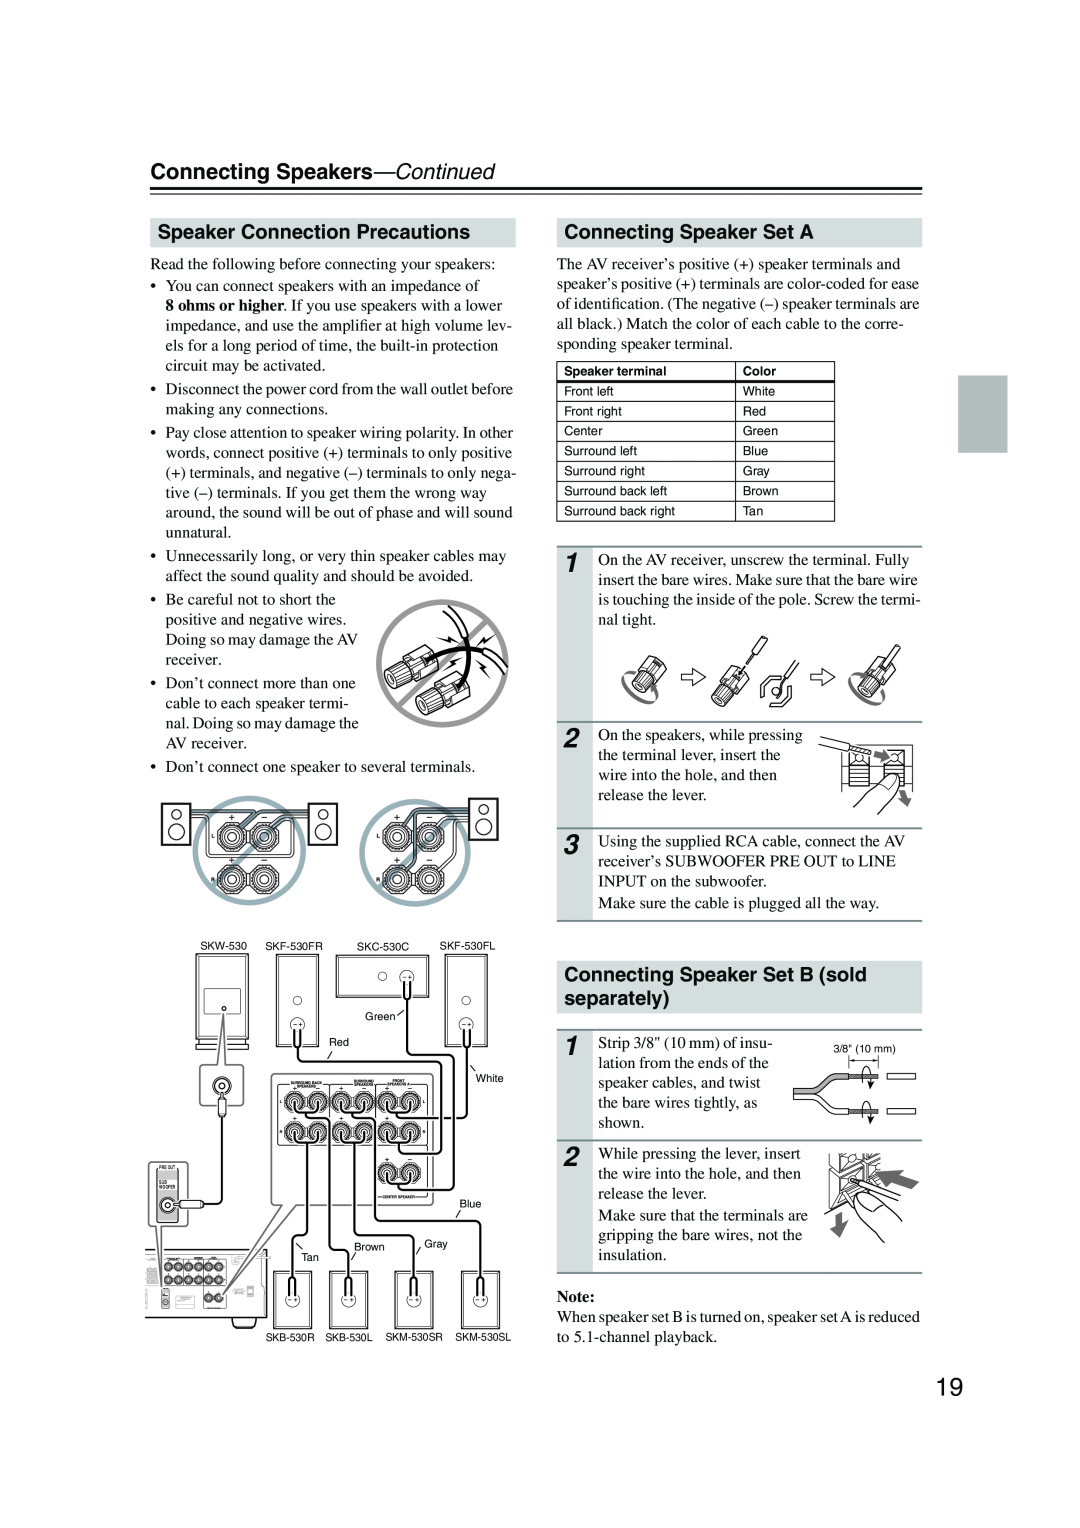 Onkyo HT-S780 instruction manual Connecting Speakers—Continued, Speaker Connection Precautions, Connecting Speaker Set A 